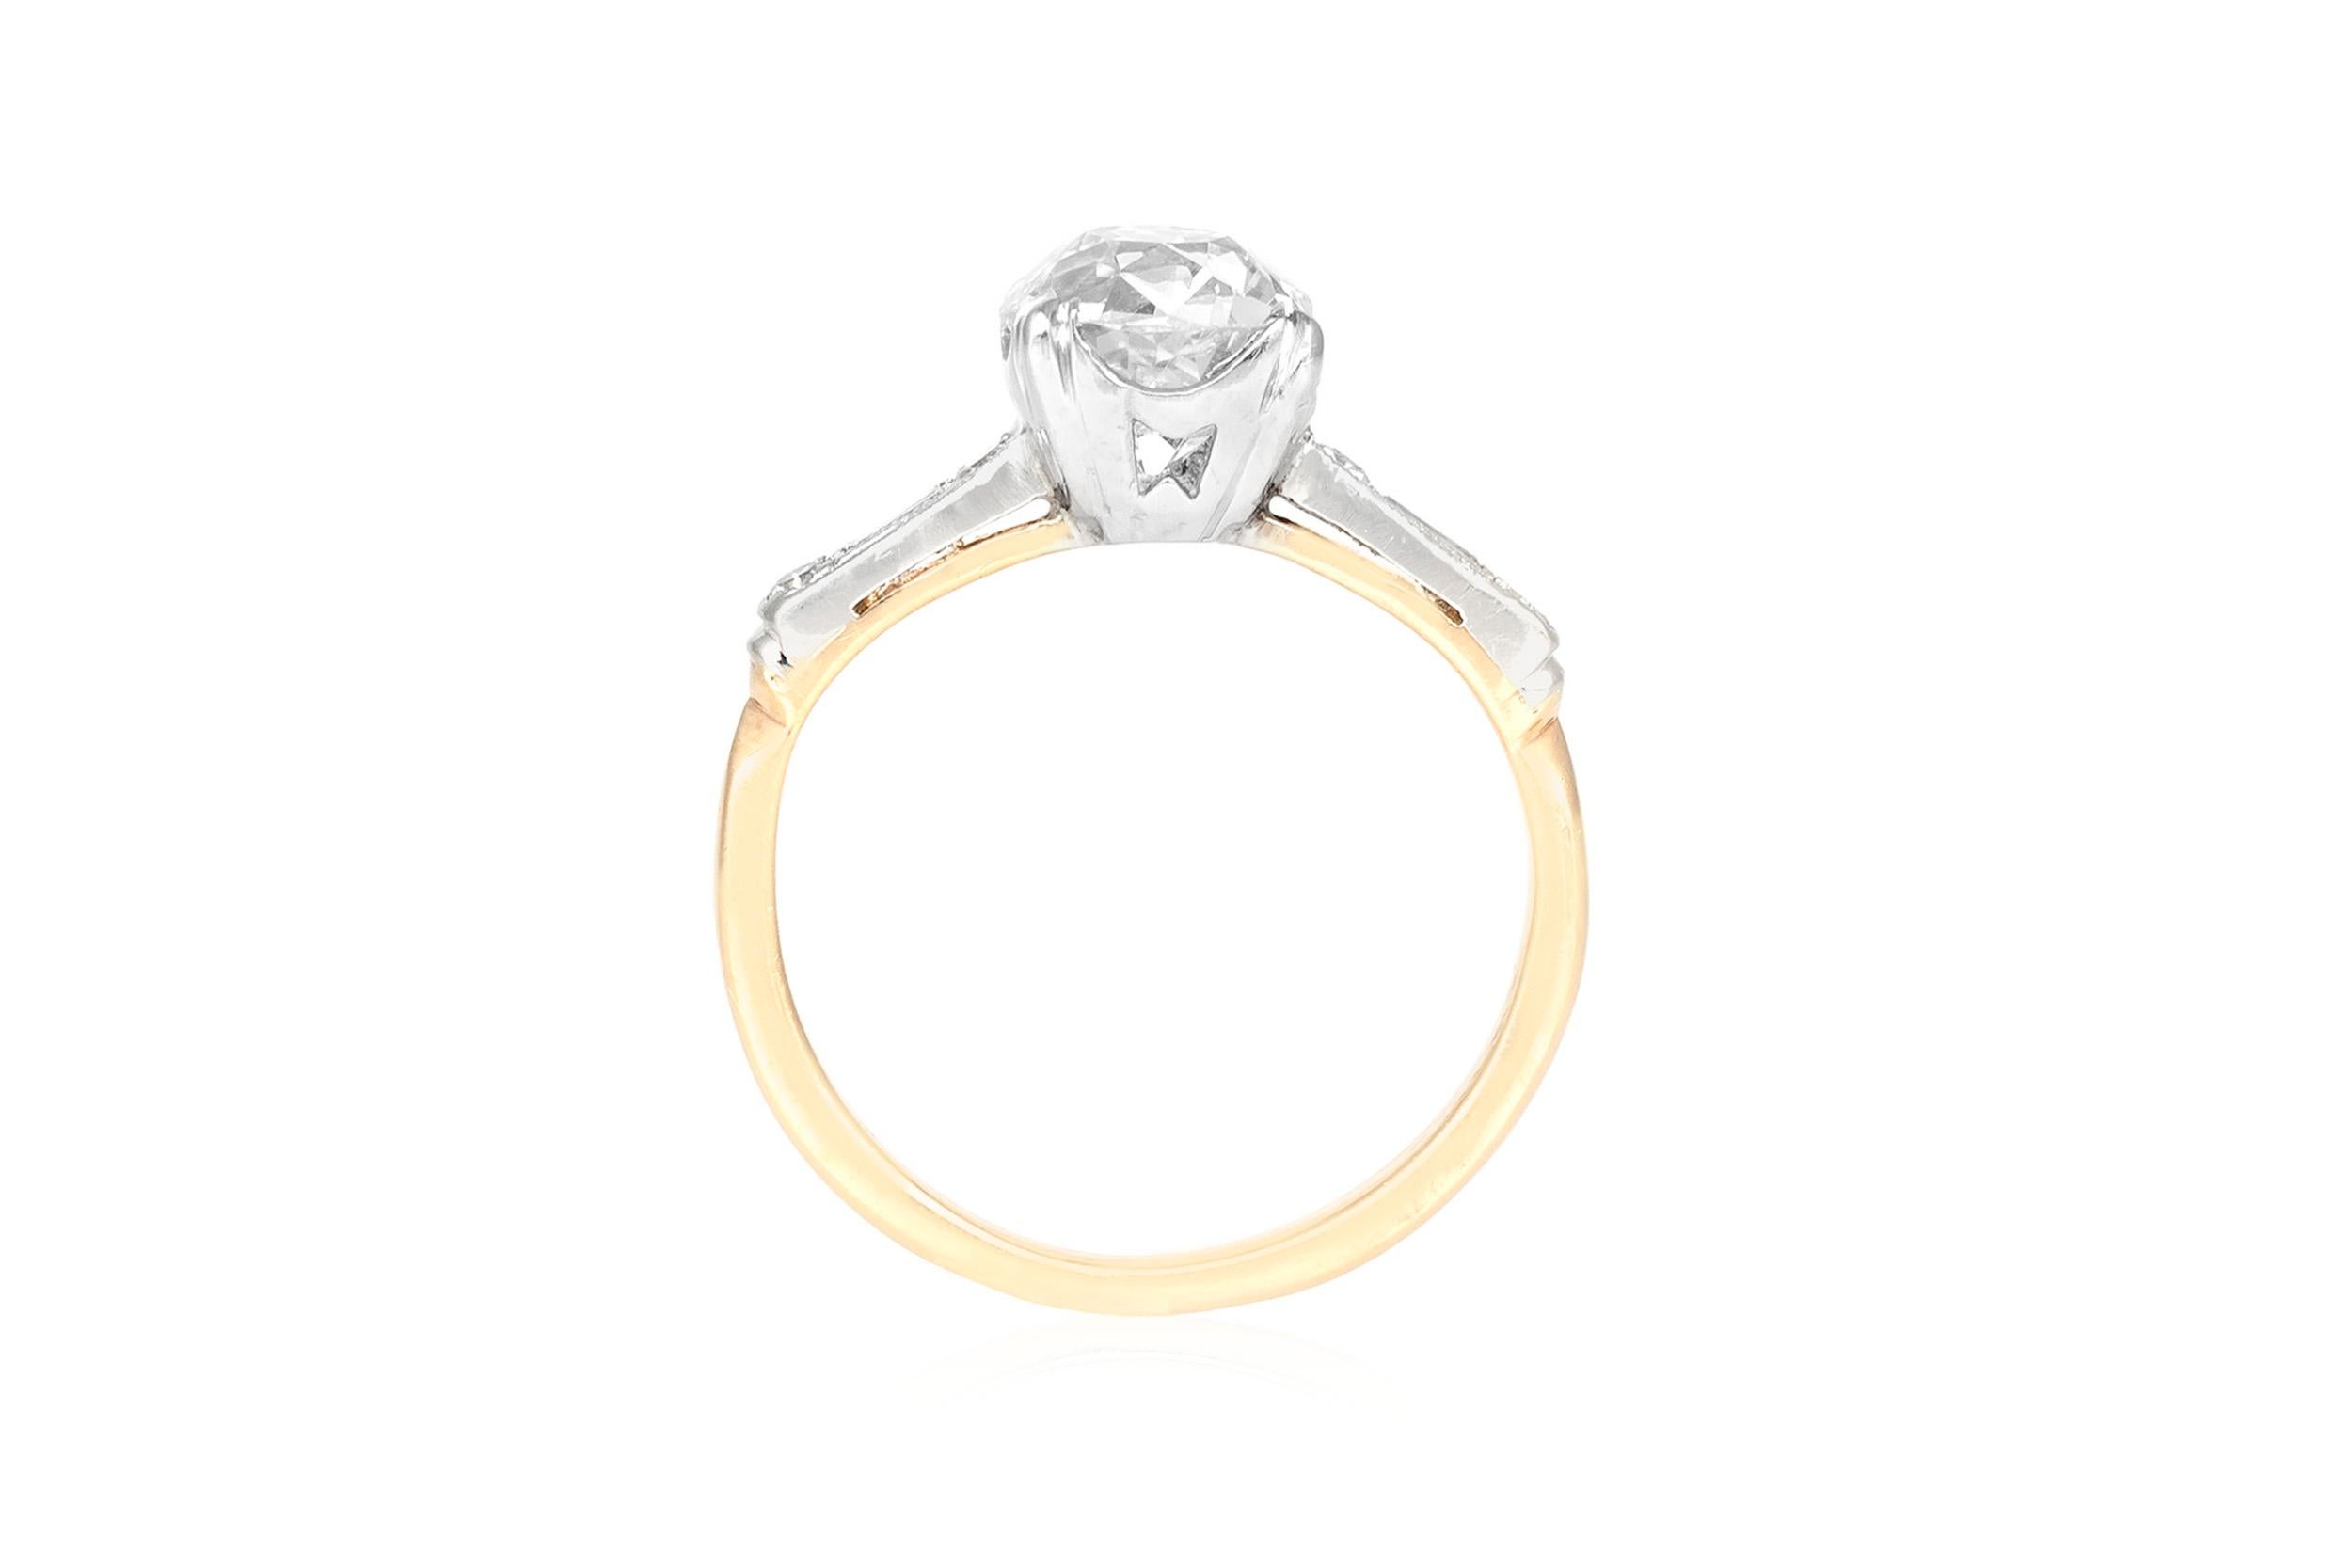 The beautiful Engagement ring is finely crafted in 14k yellow gold With round center diamond weighing approximately total of 1.67 carat.
Color J    Clarity VS1
Circa 1910